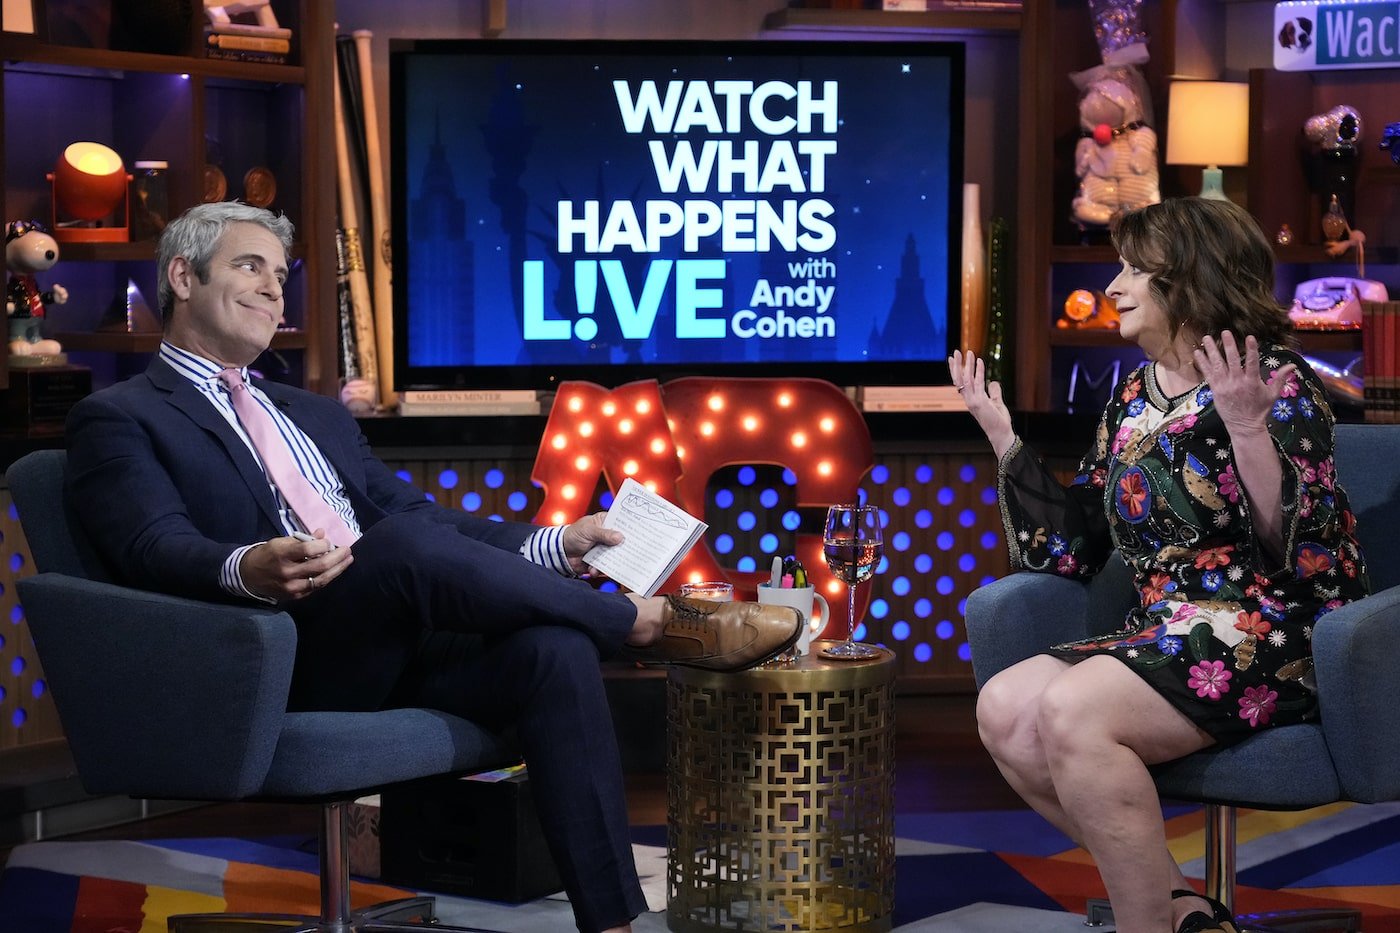 Andy Cohen listens as Rachel Dratch discusses her appearance on 'RHONY.'